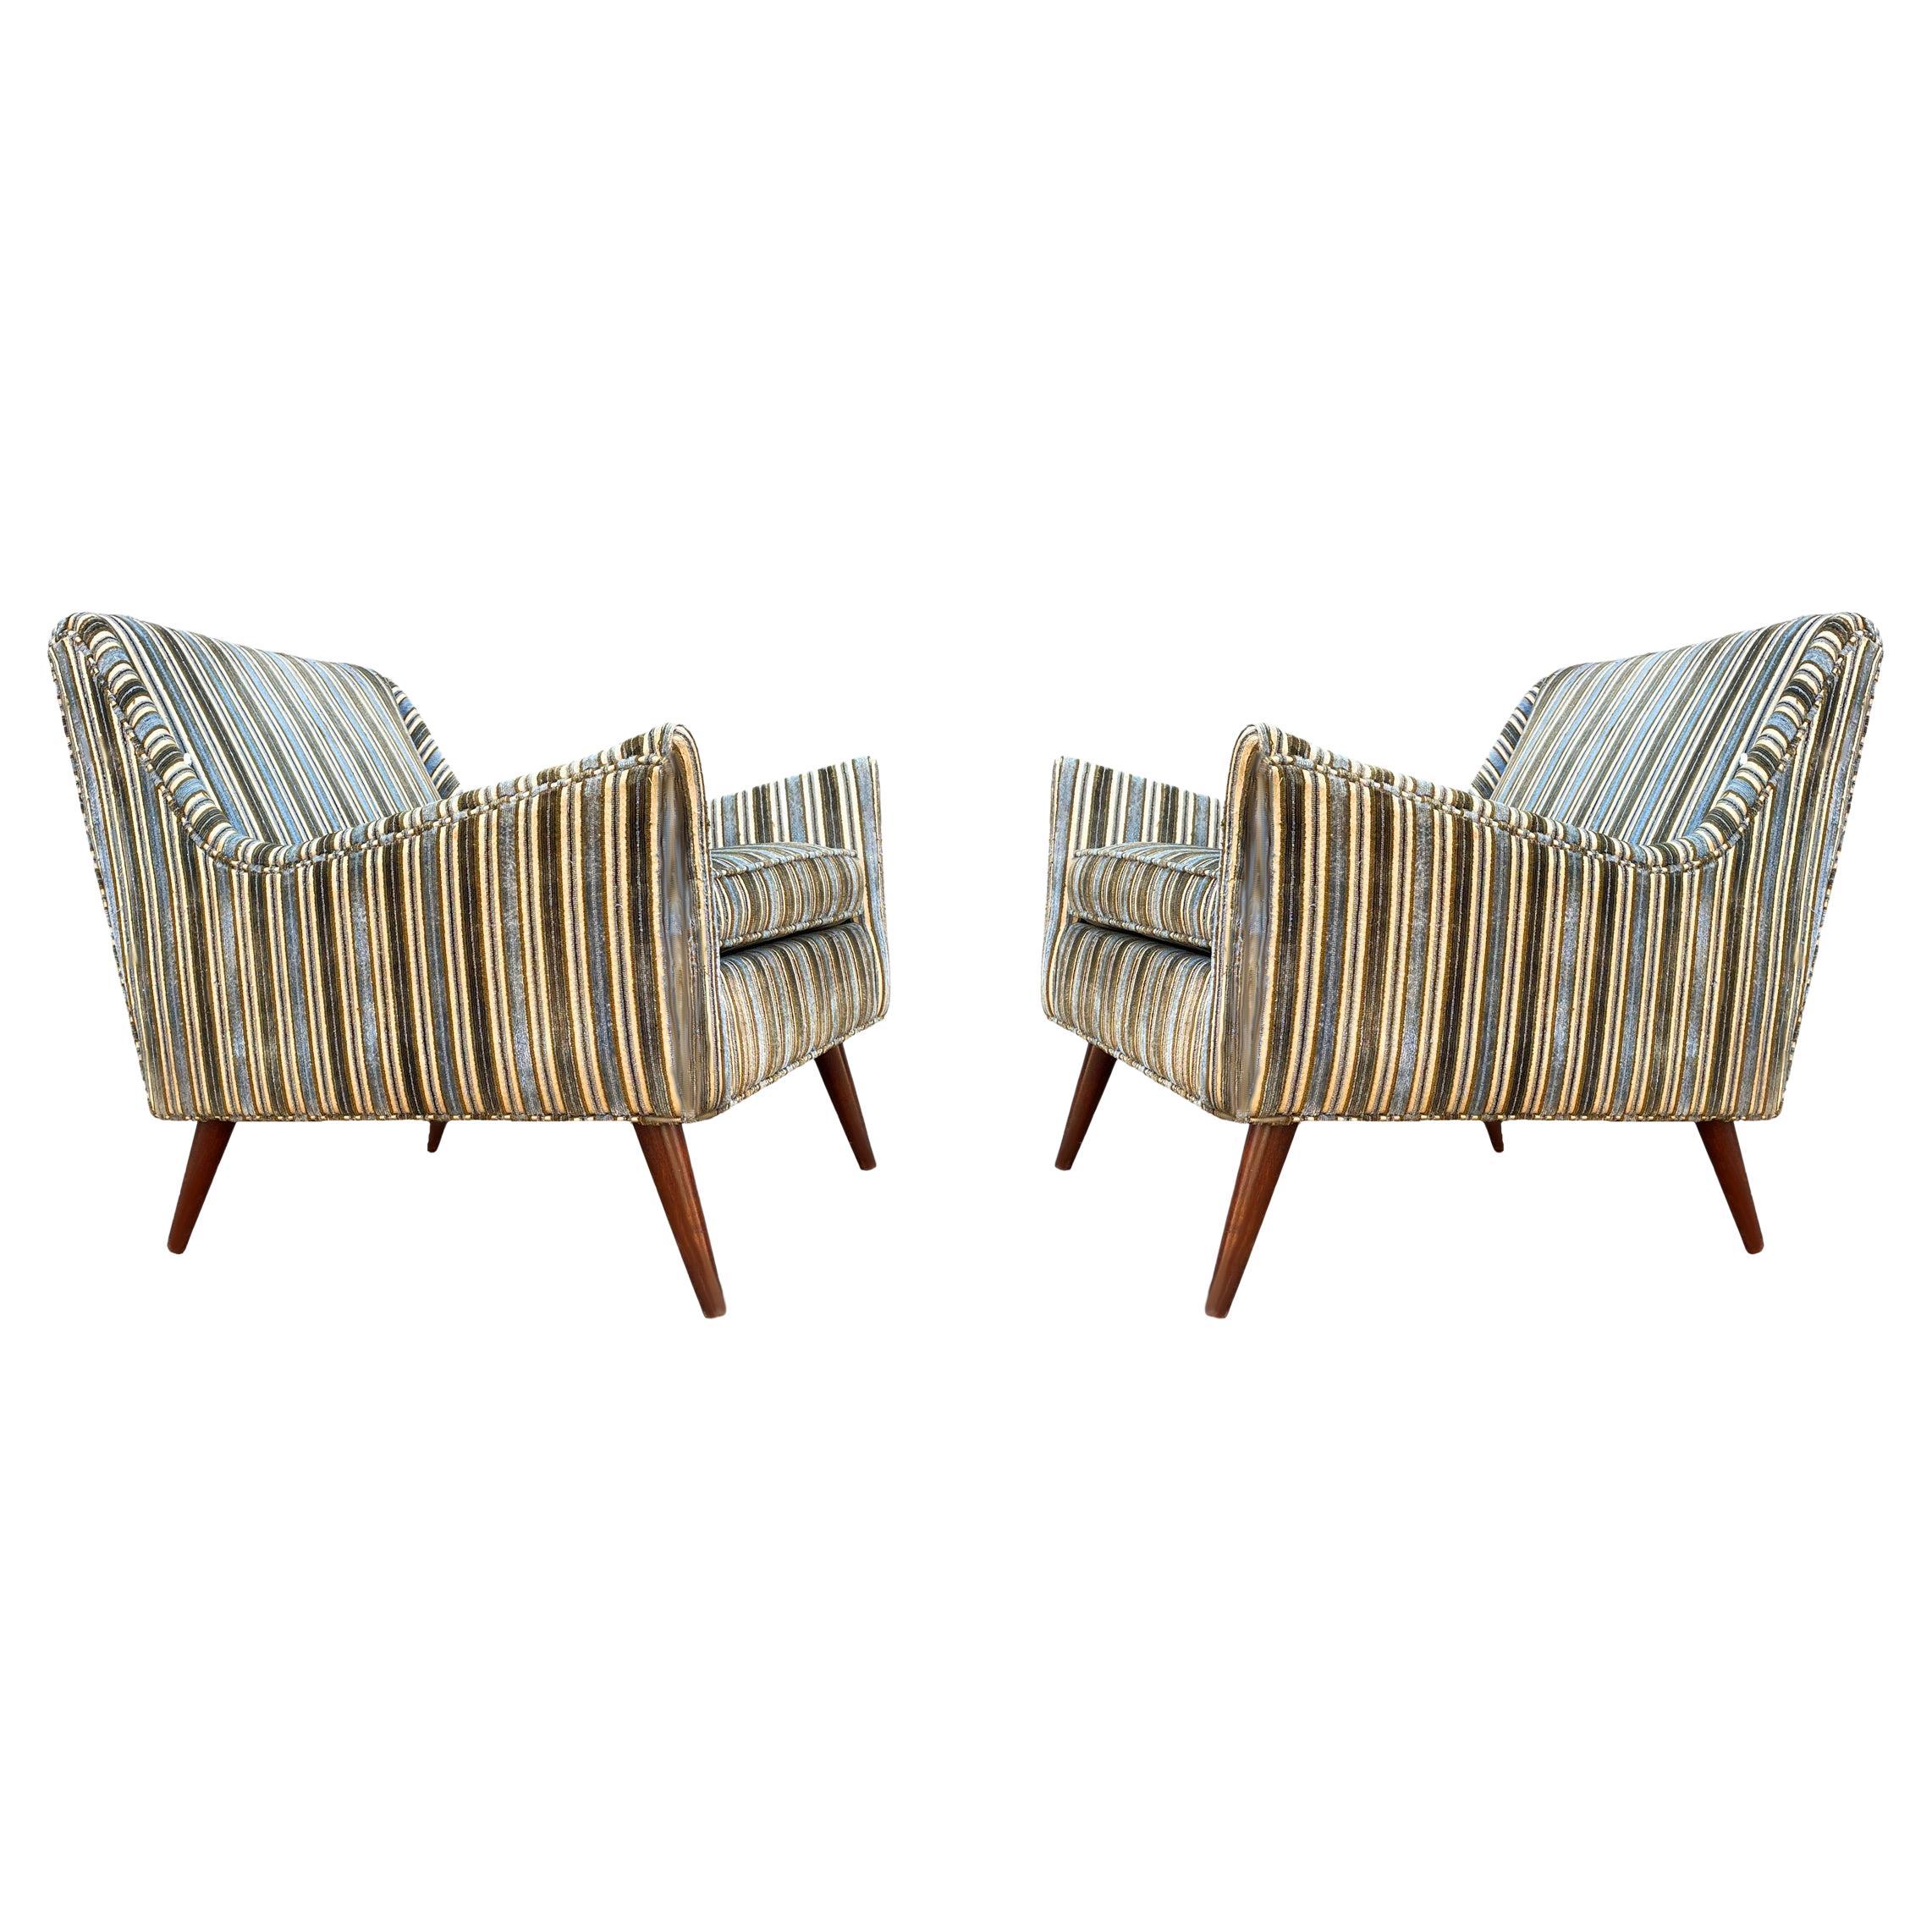 Pair of Mid-Century Modern Sculptural Lounge Chairs in the the of Harvey Probber